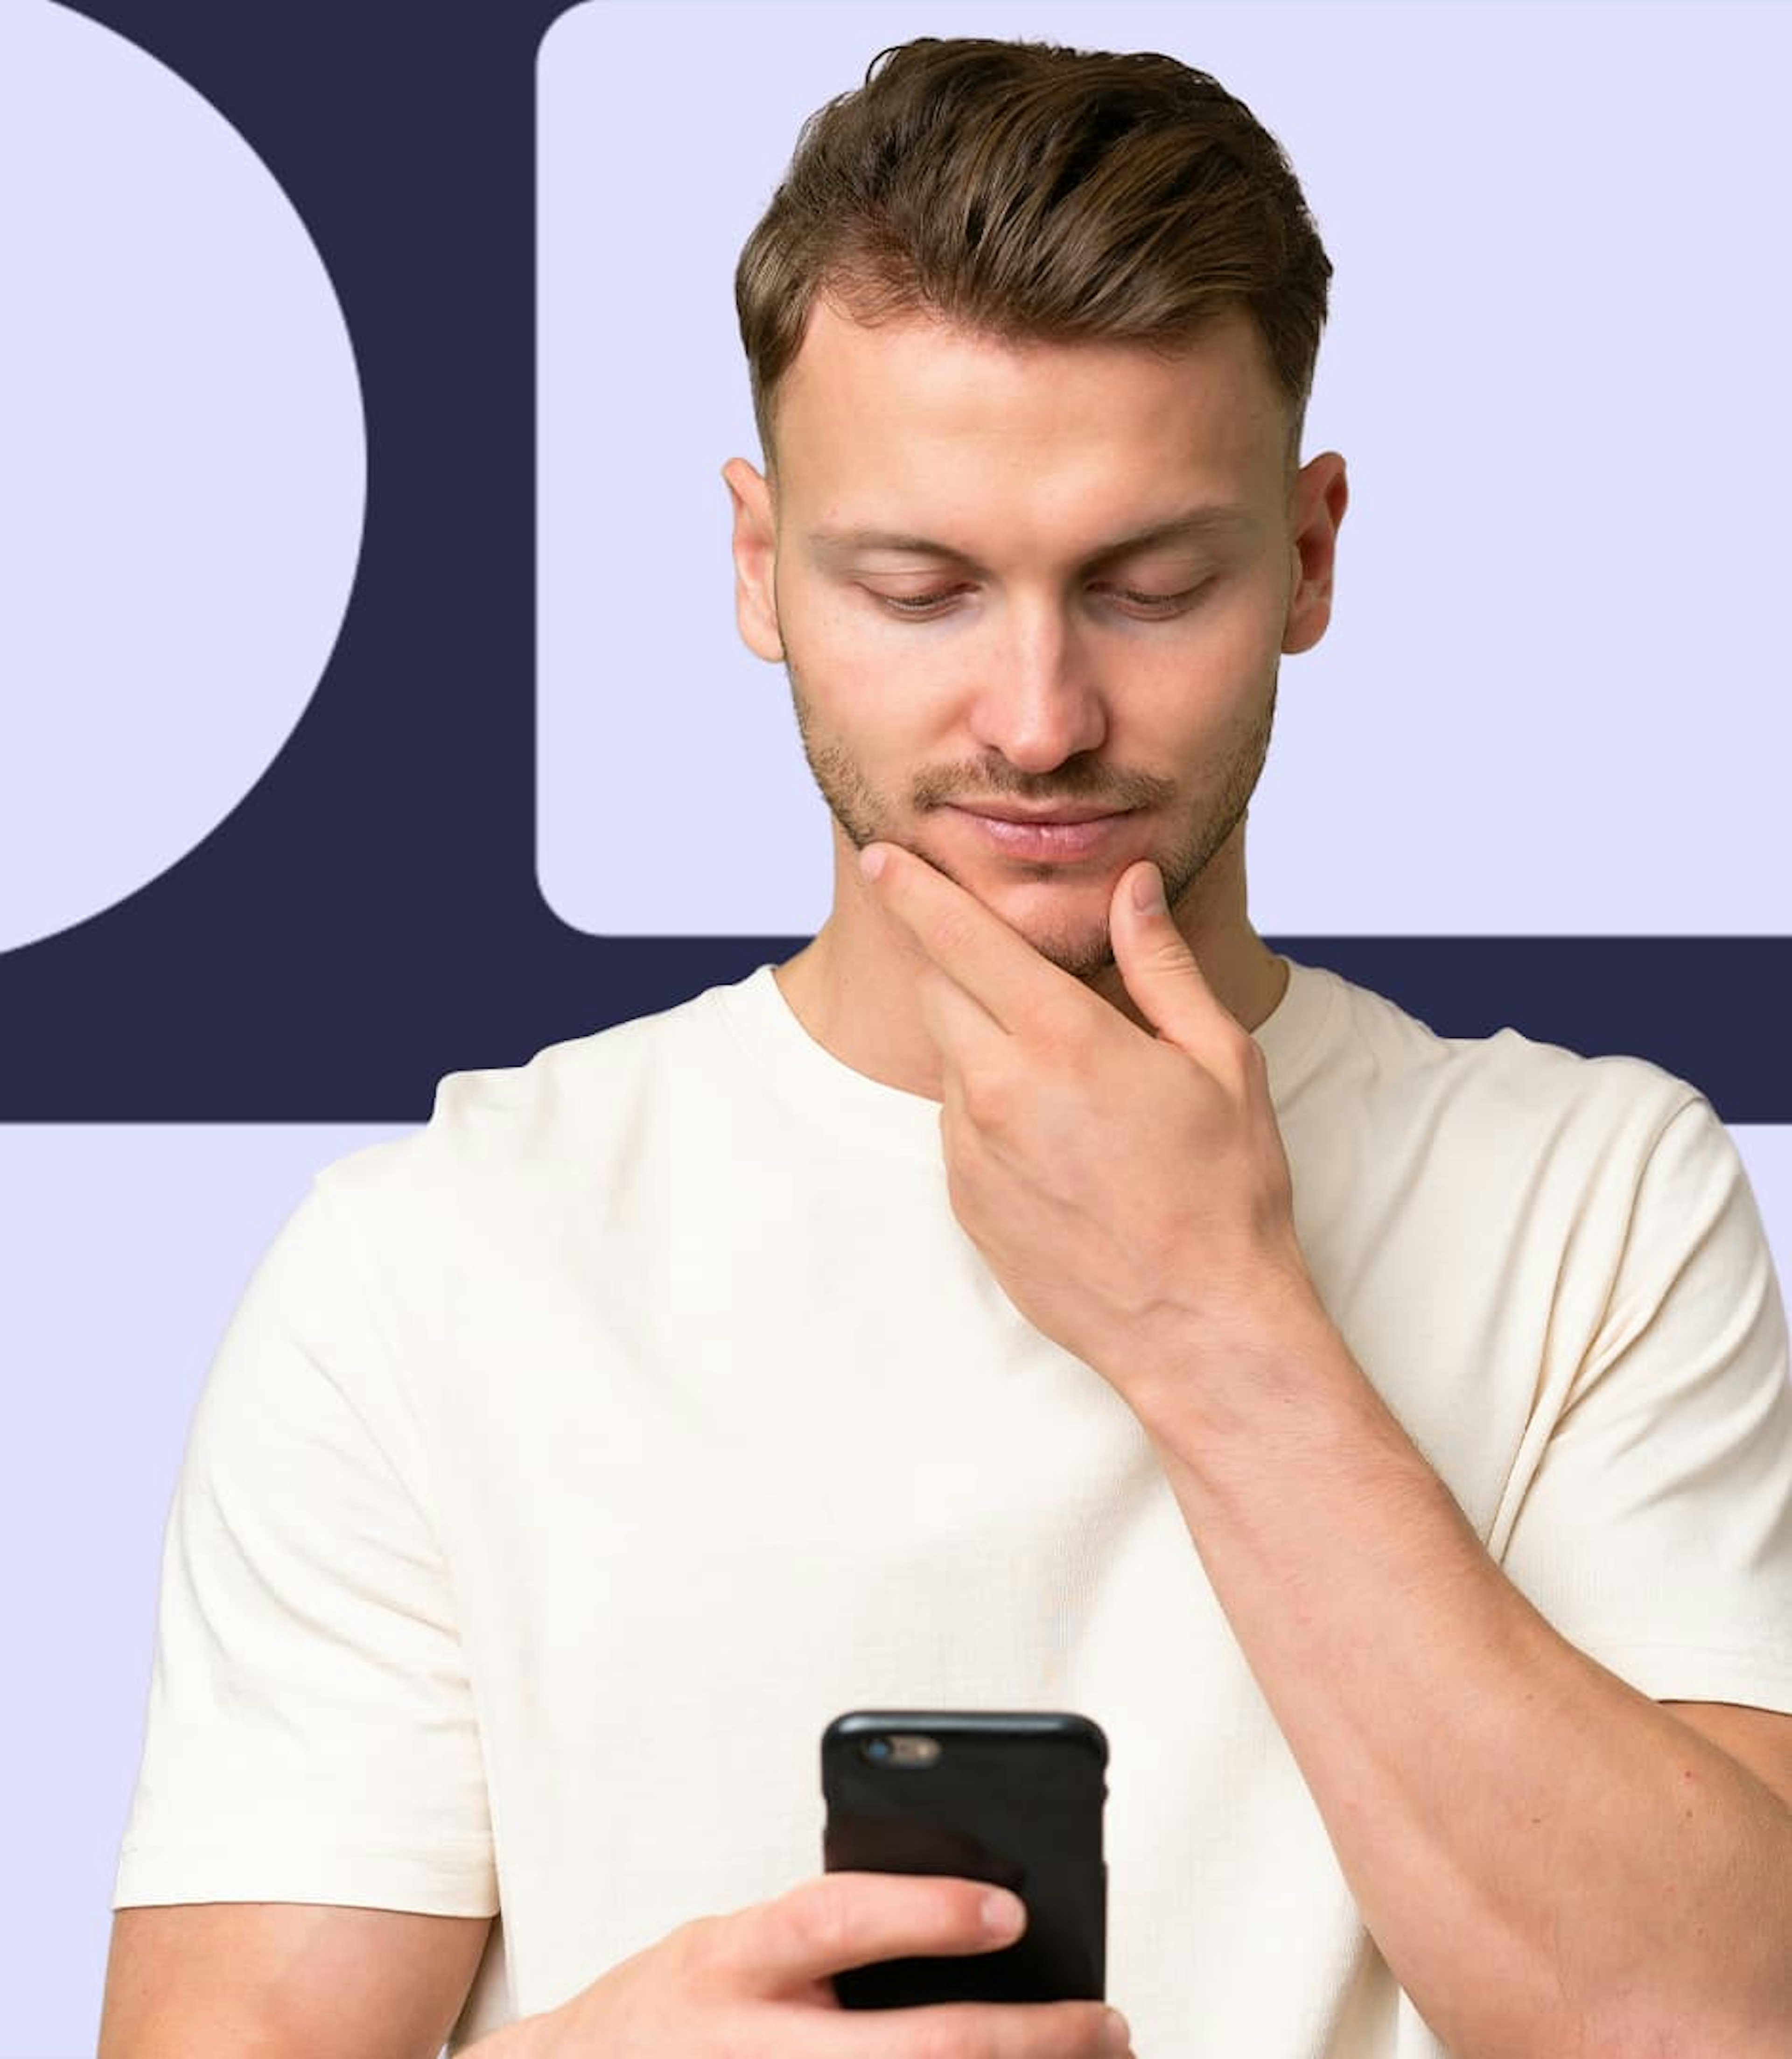 A man is has one hand resting on his chin in deep thought, as he holds a cellphone in the other hand.